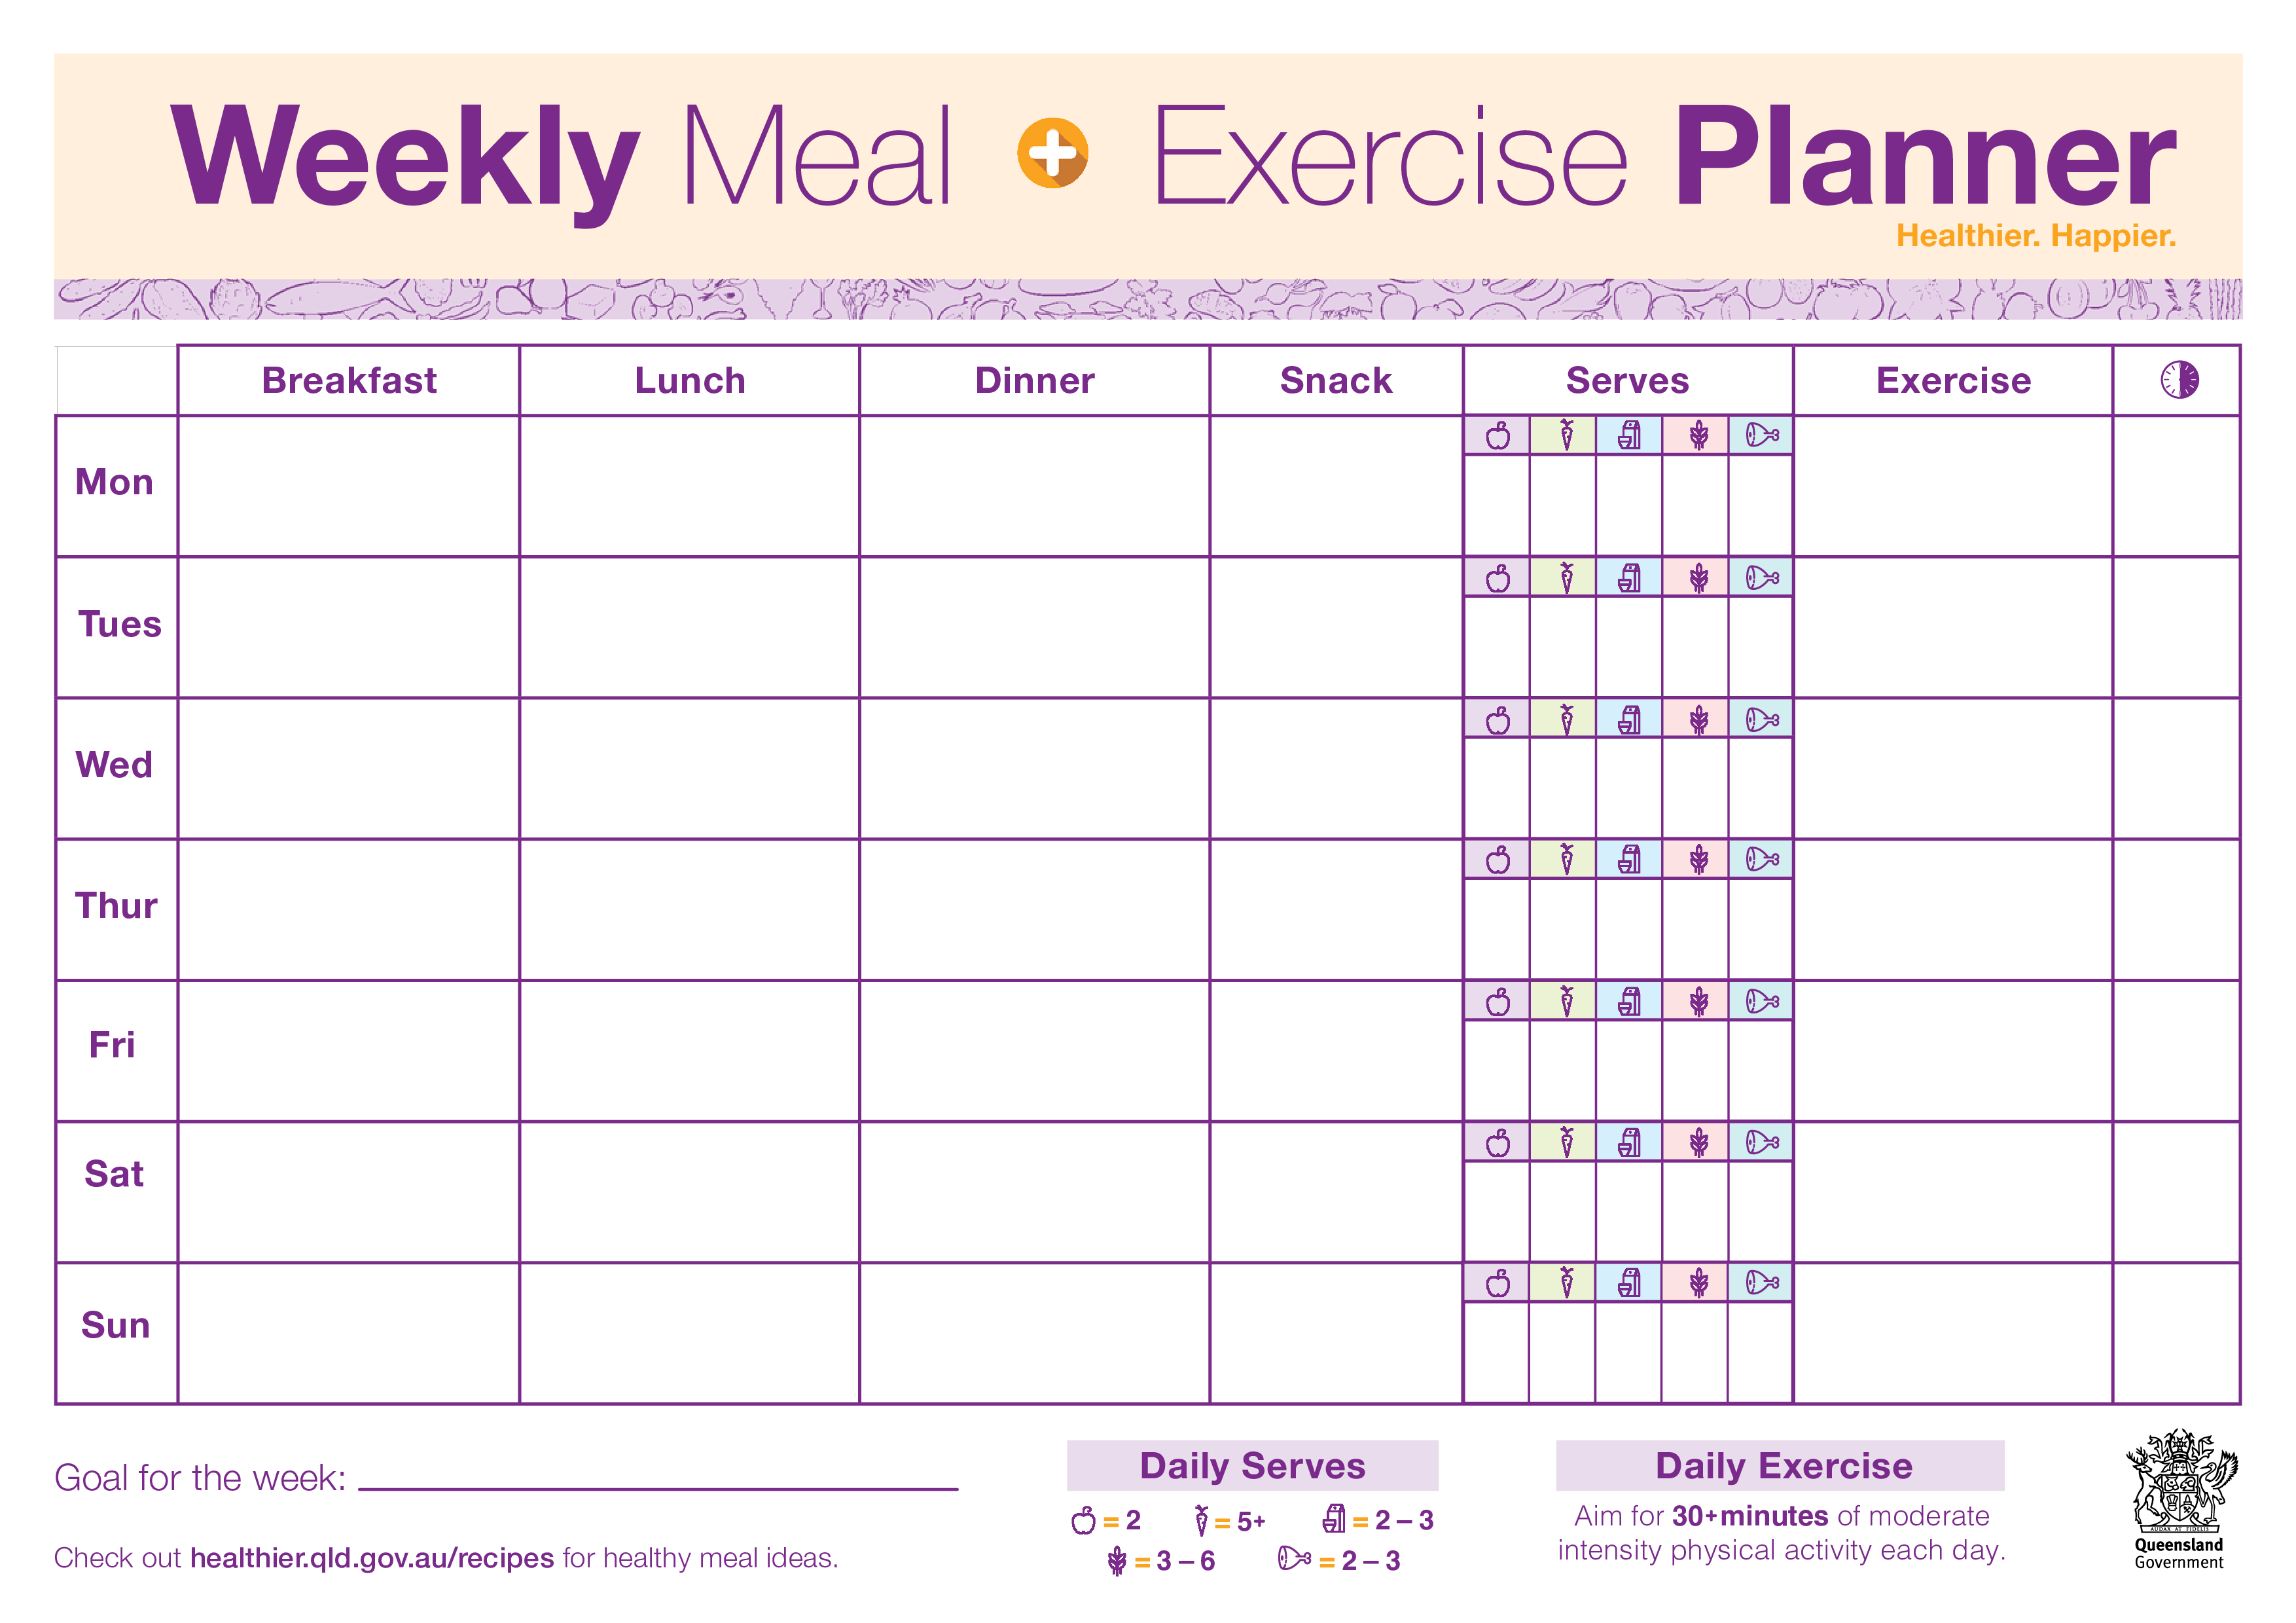 Weekly Meal Exercise Planner Templates at allbusinesstemplates com